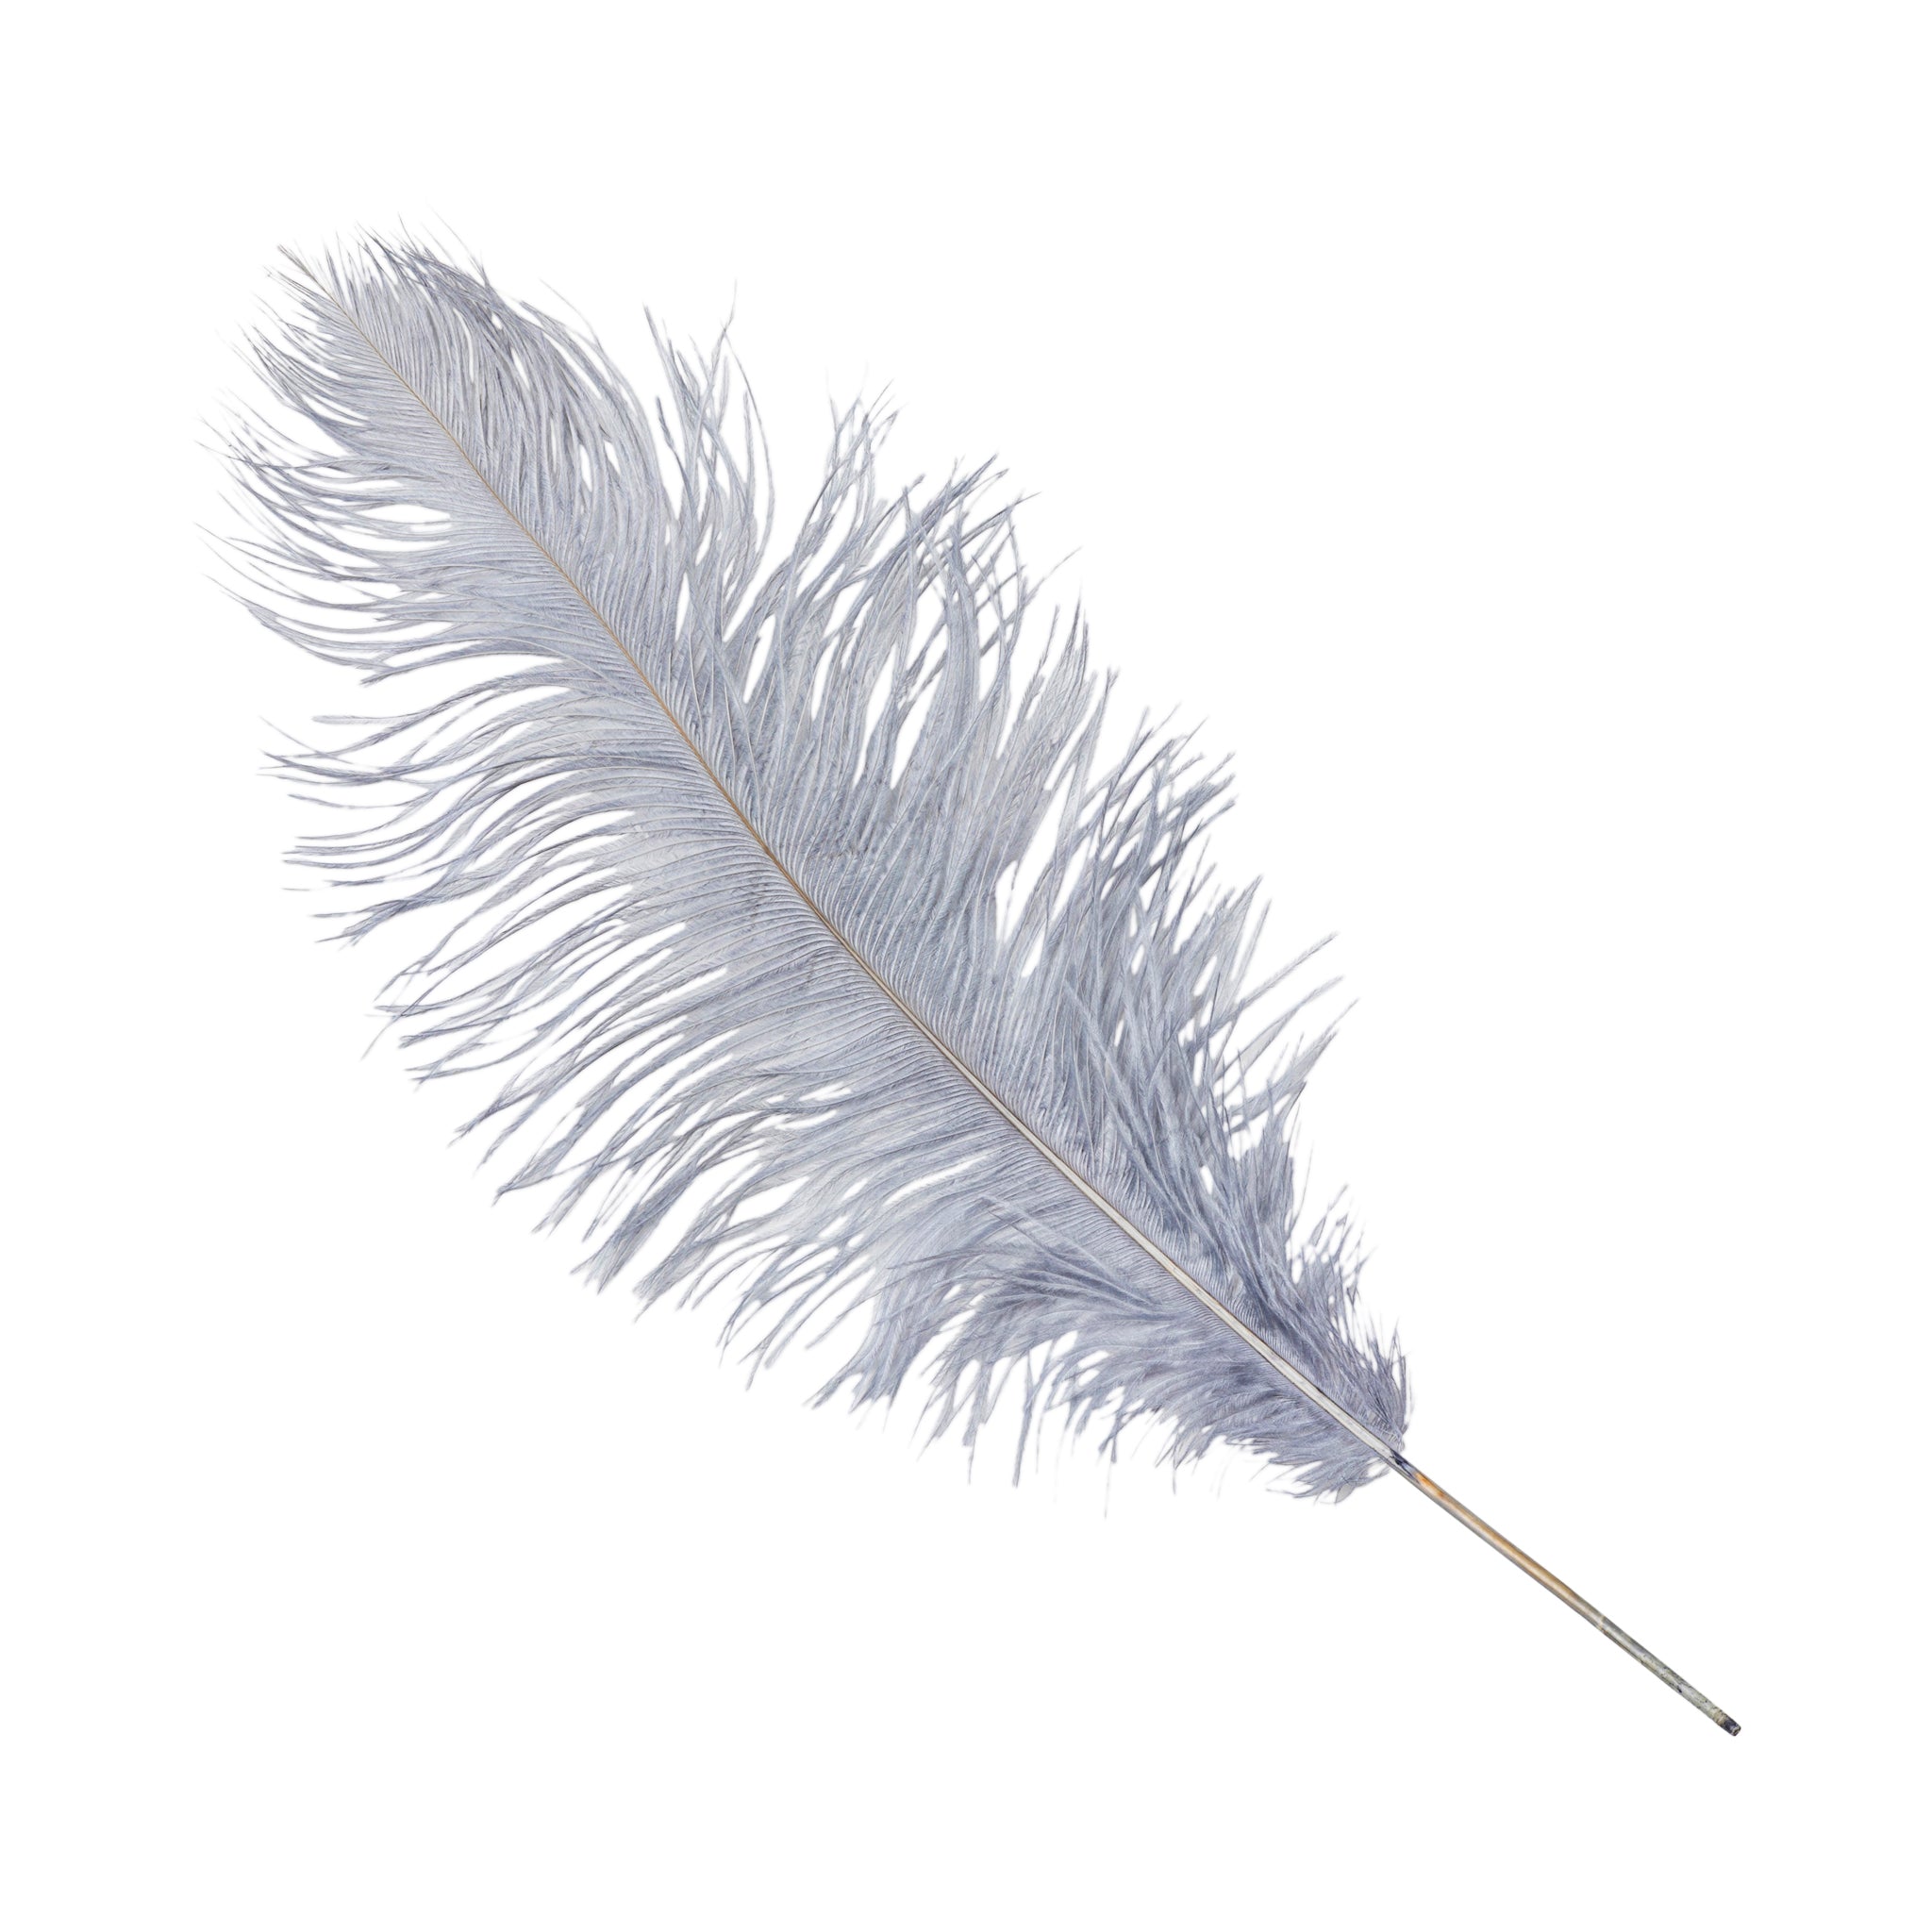 14-16 Ostrich Feathers: Black (6)